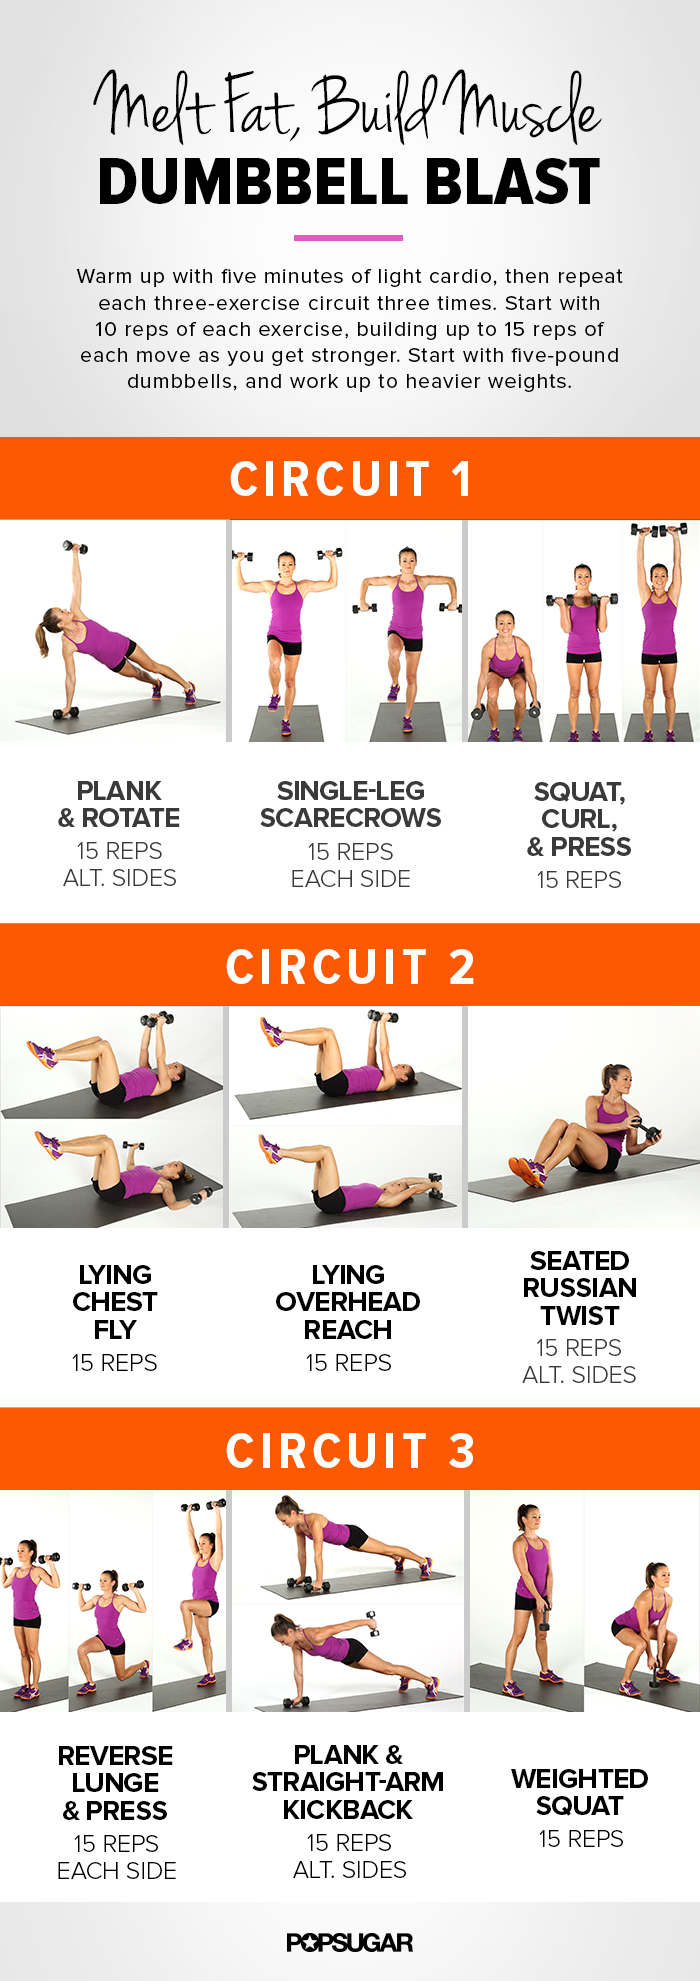 At Home Arm Workout Program